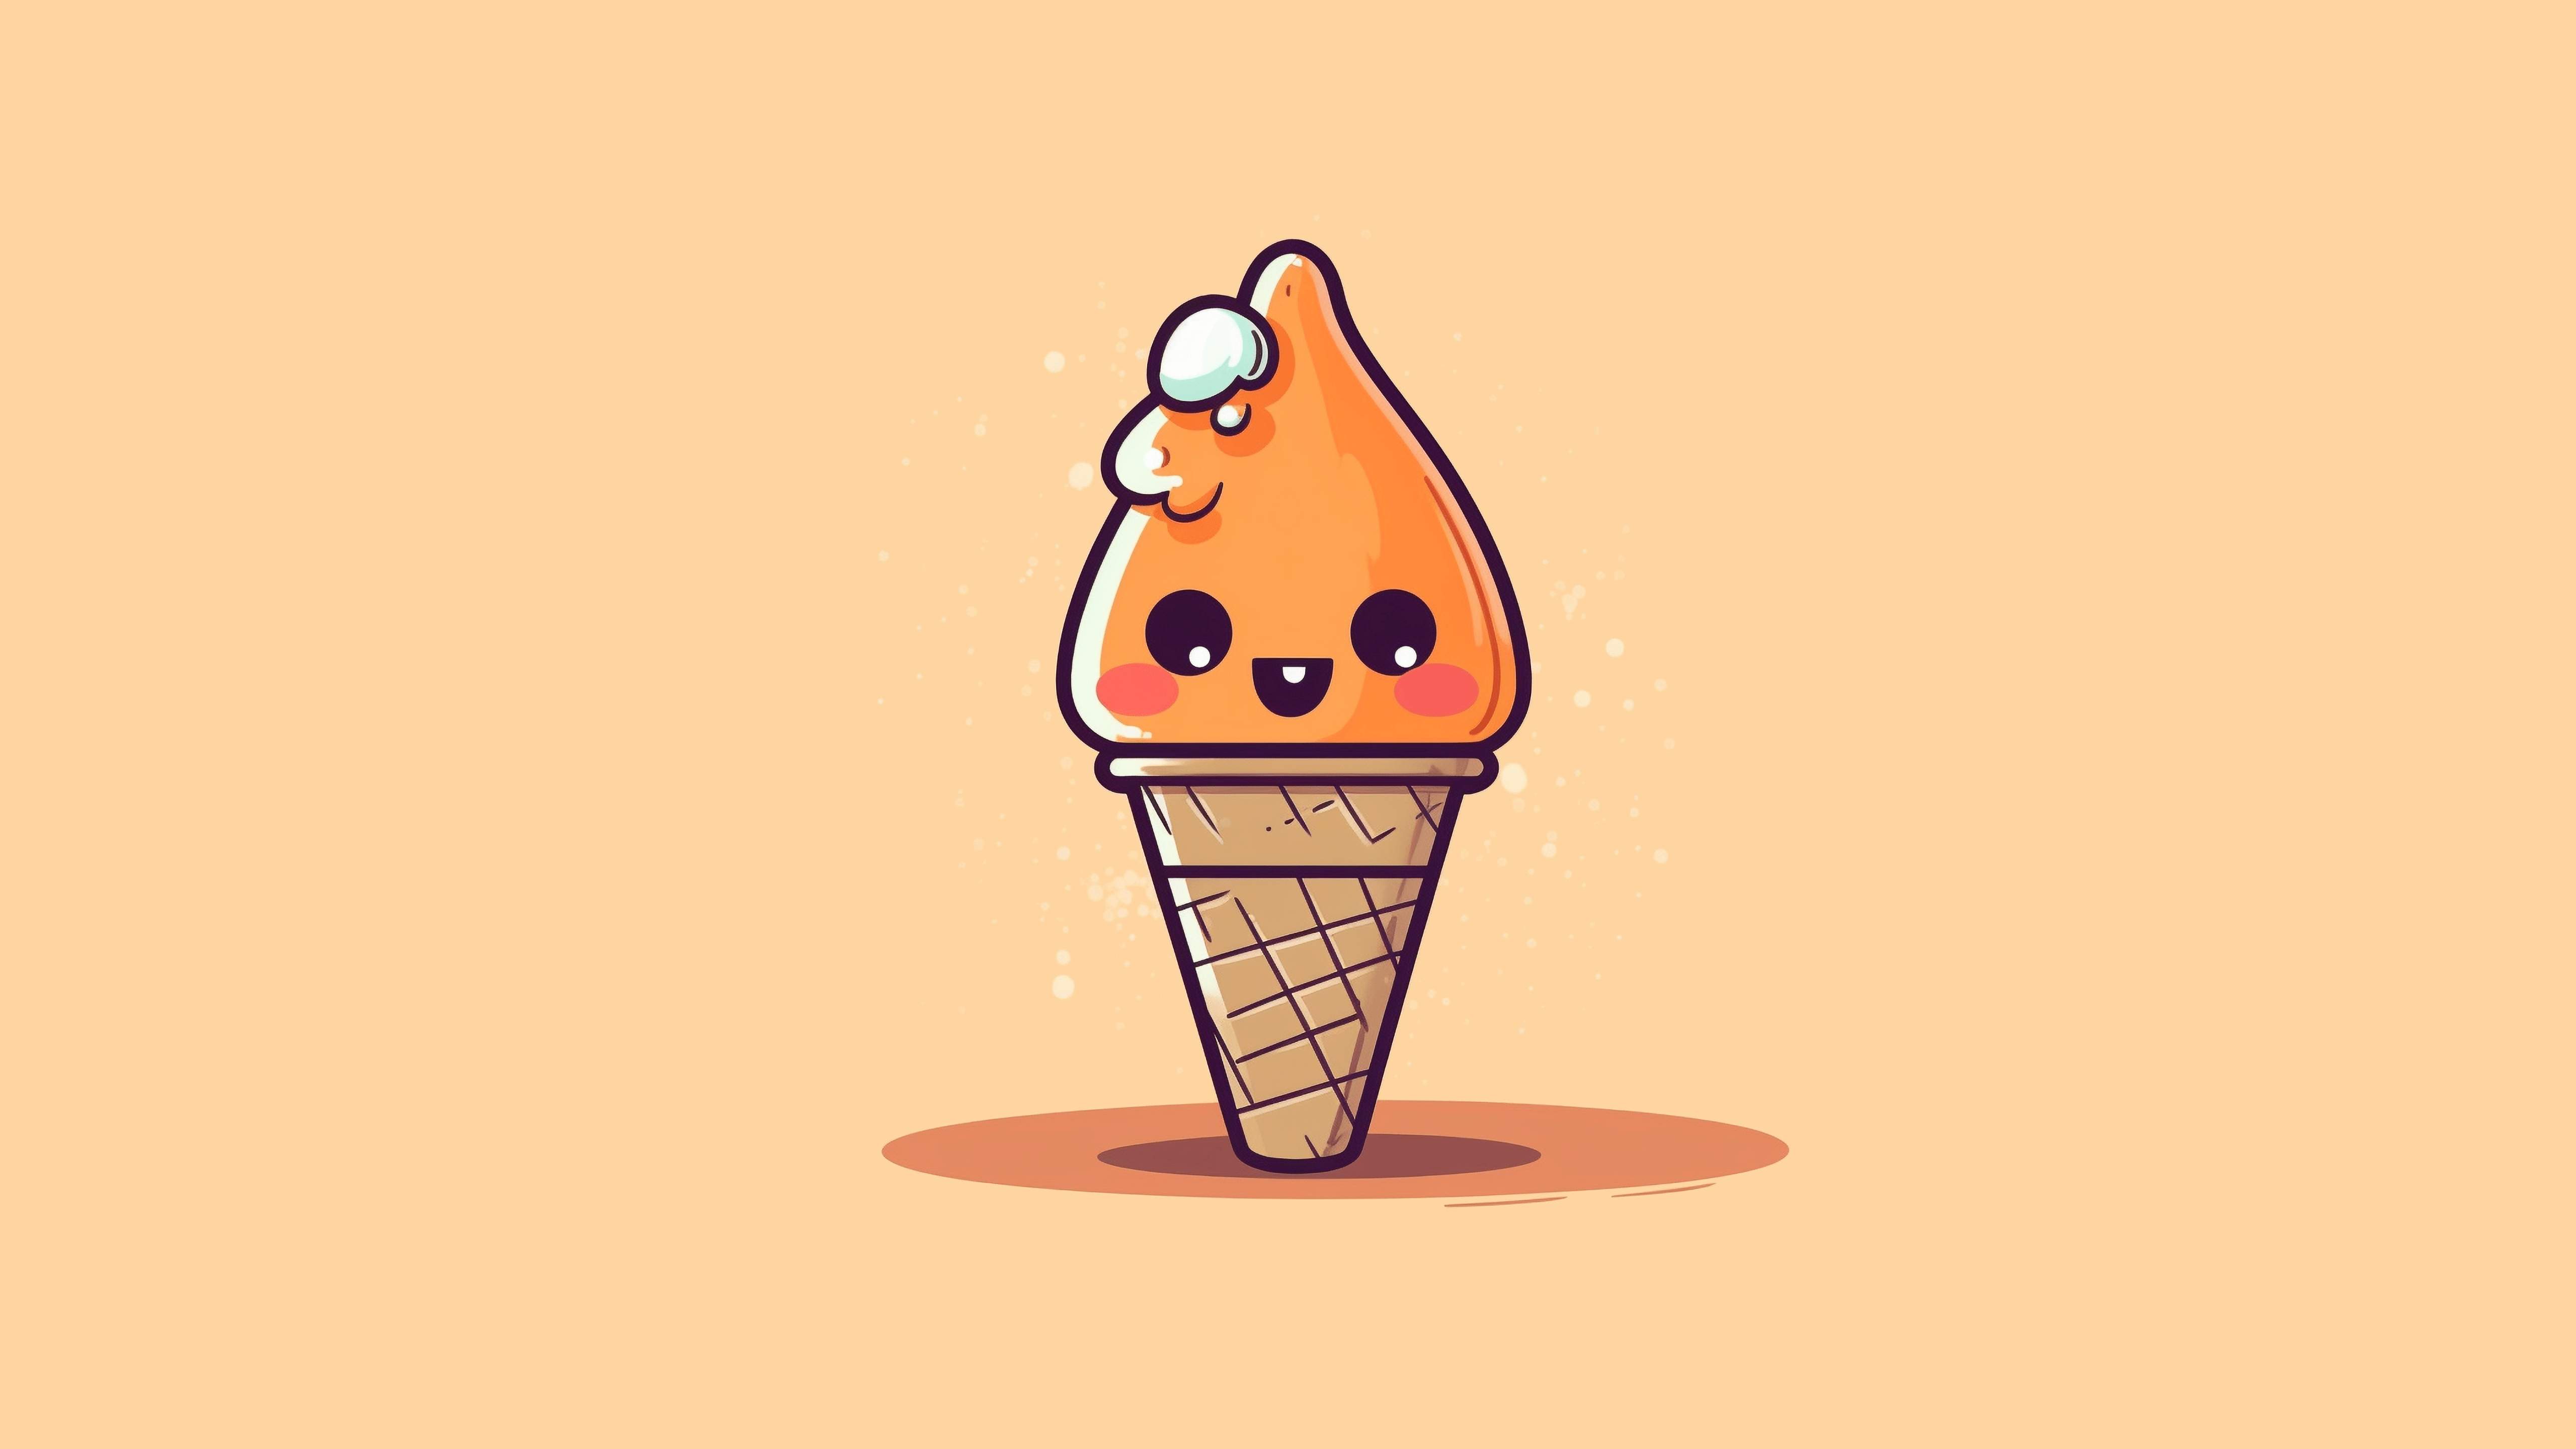 An illustration of a smiling ice cream cone with a brown waffle cone and a brown smiley face with a pink tongue and pink cheeks. - Kawaii, pretty, ice cream